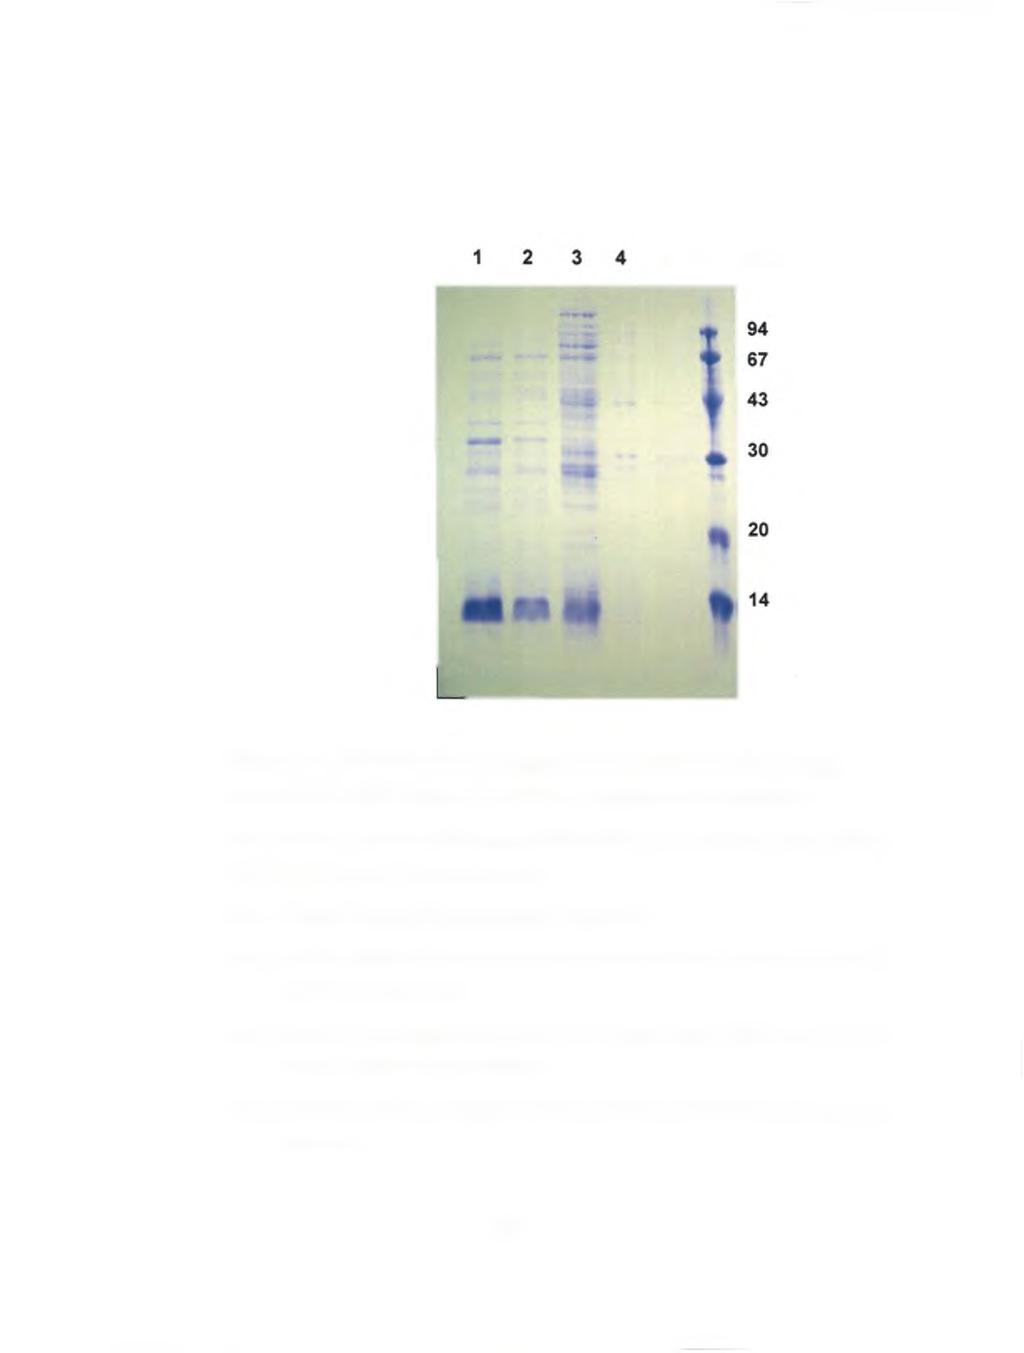 5 6 kda Figure 5.6 SDS-Polyacrylamide gel electrophoresis of the recombinant protein pet-pdest42-xyl-cat purified by non-denaturing condition. The gel was stained with Coomassie Brilliant Blue.